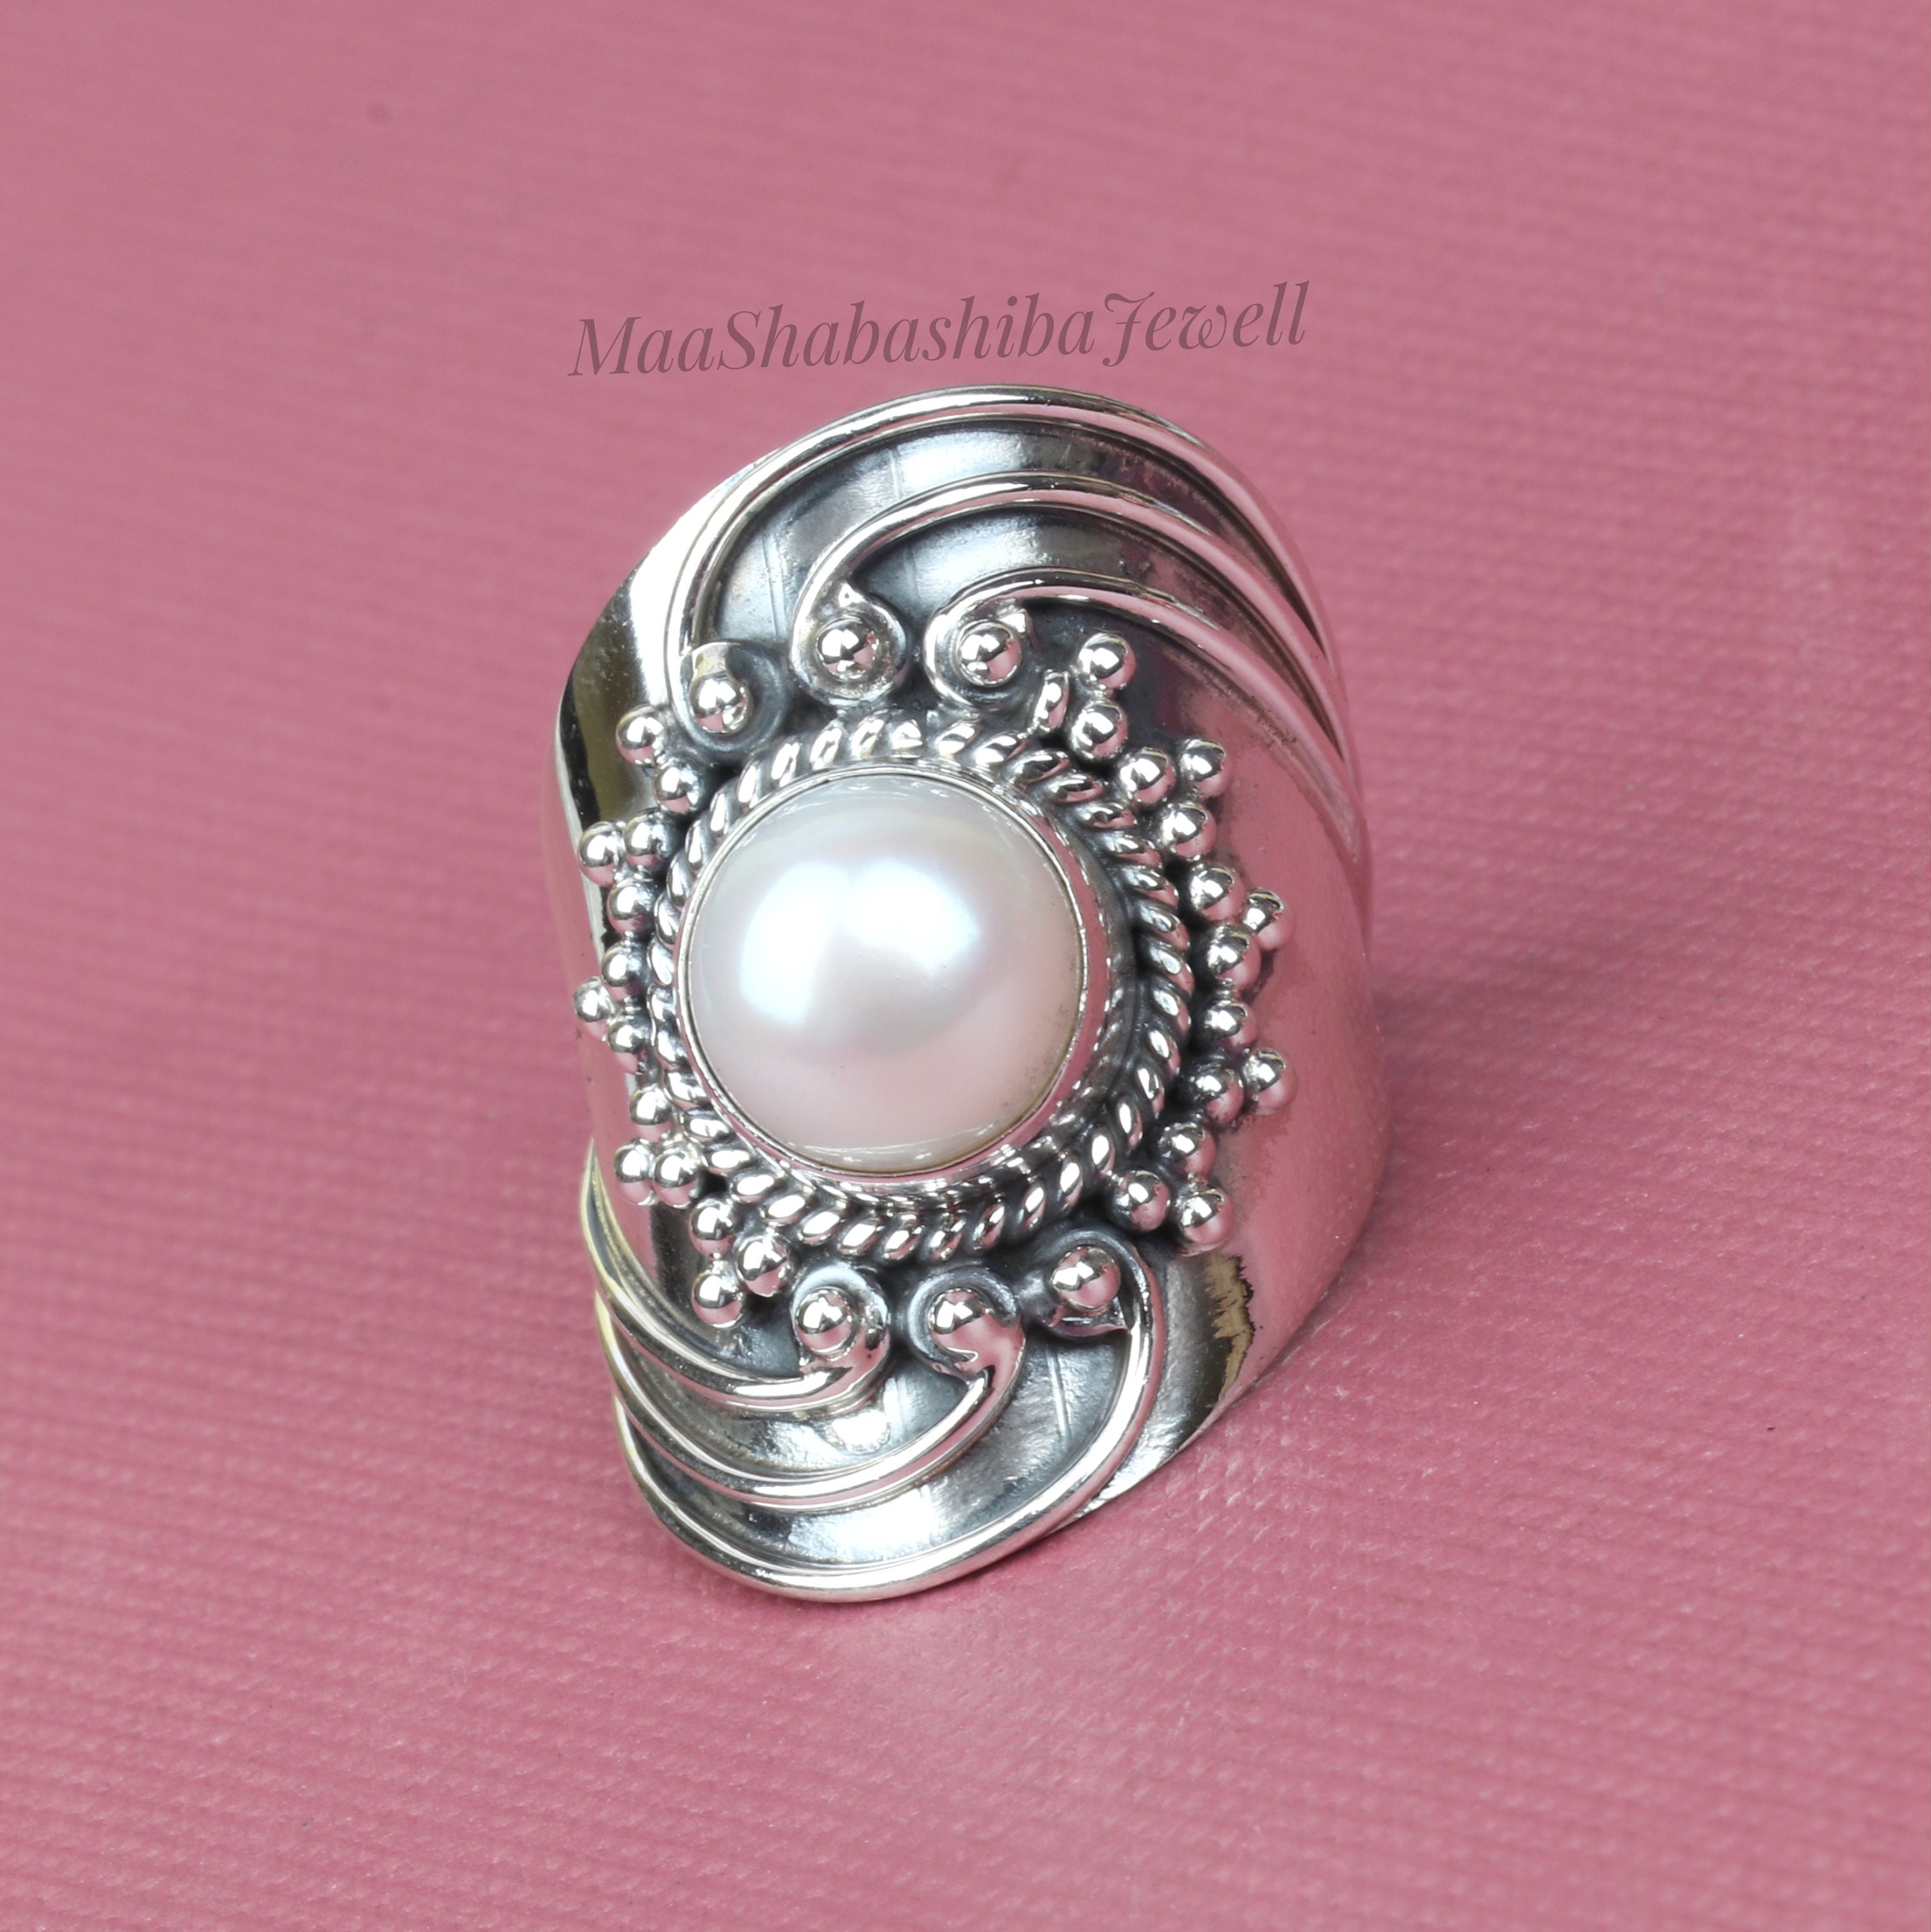 What if I stop wearing my Moti/Pearl ring that I have been wearing for a  month for a week? Does it affect? - Quora